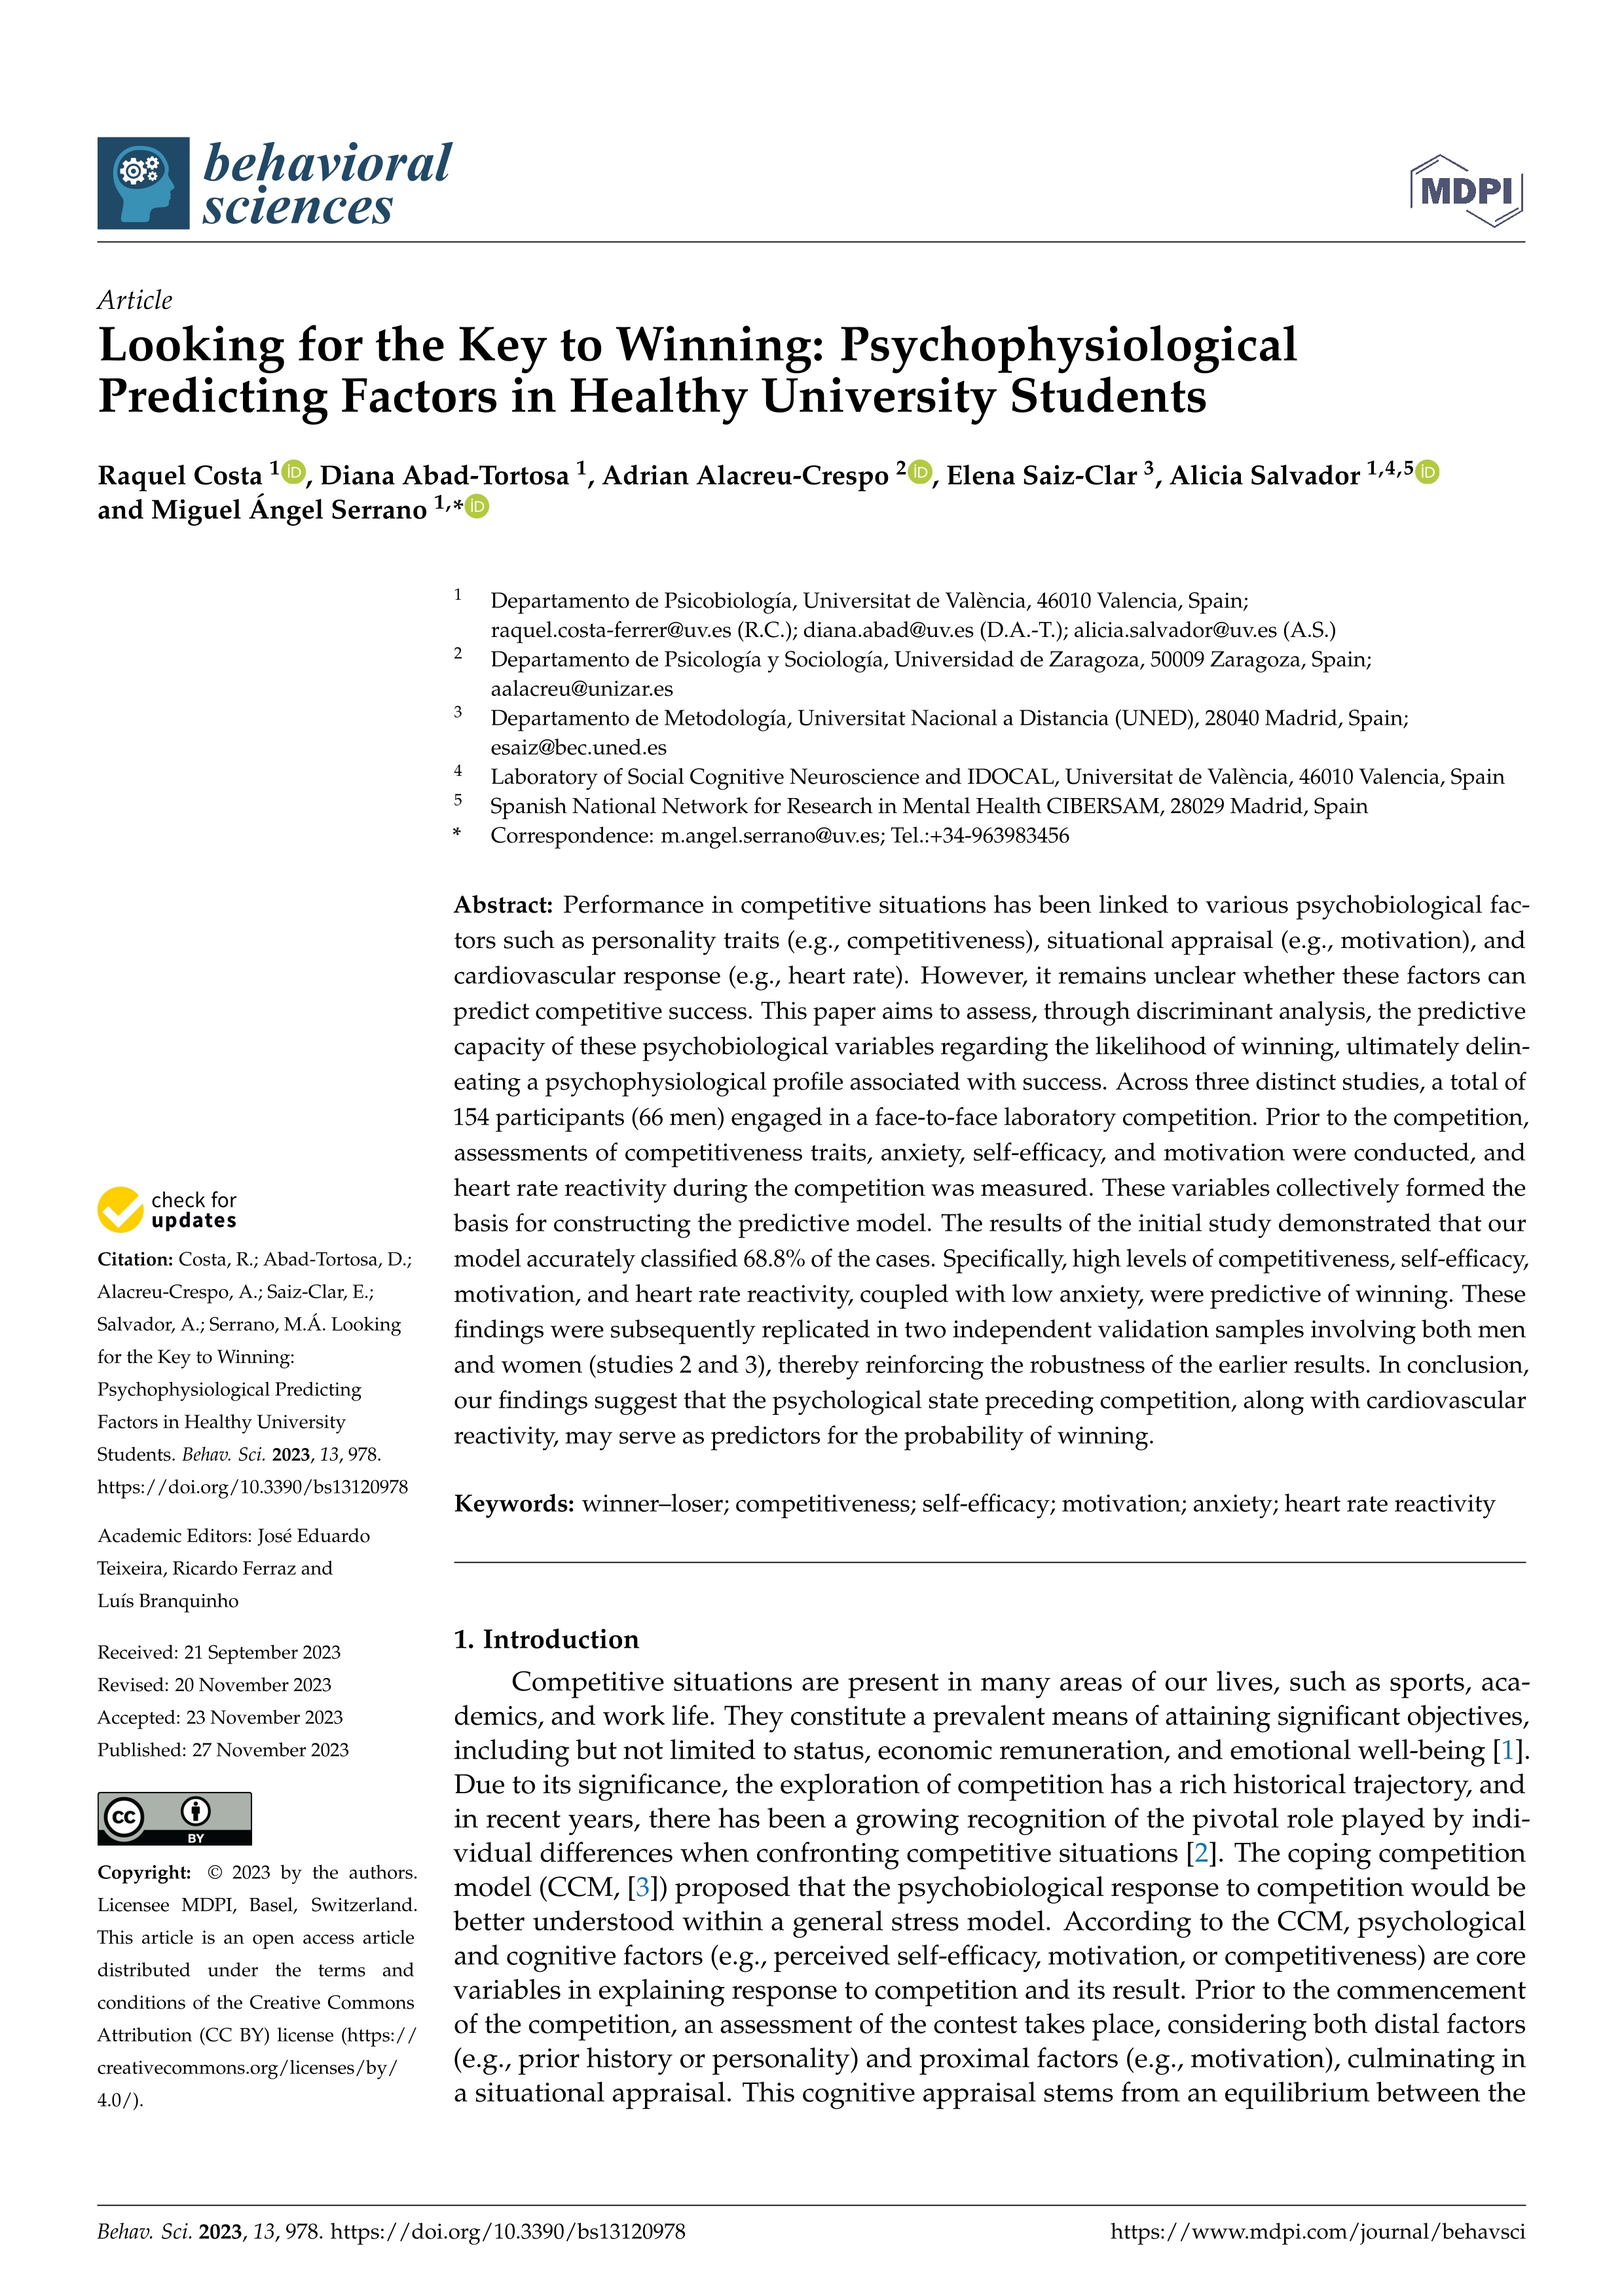 Looking for the key to winning: psychophysiological predicting factors in healthy university students